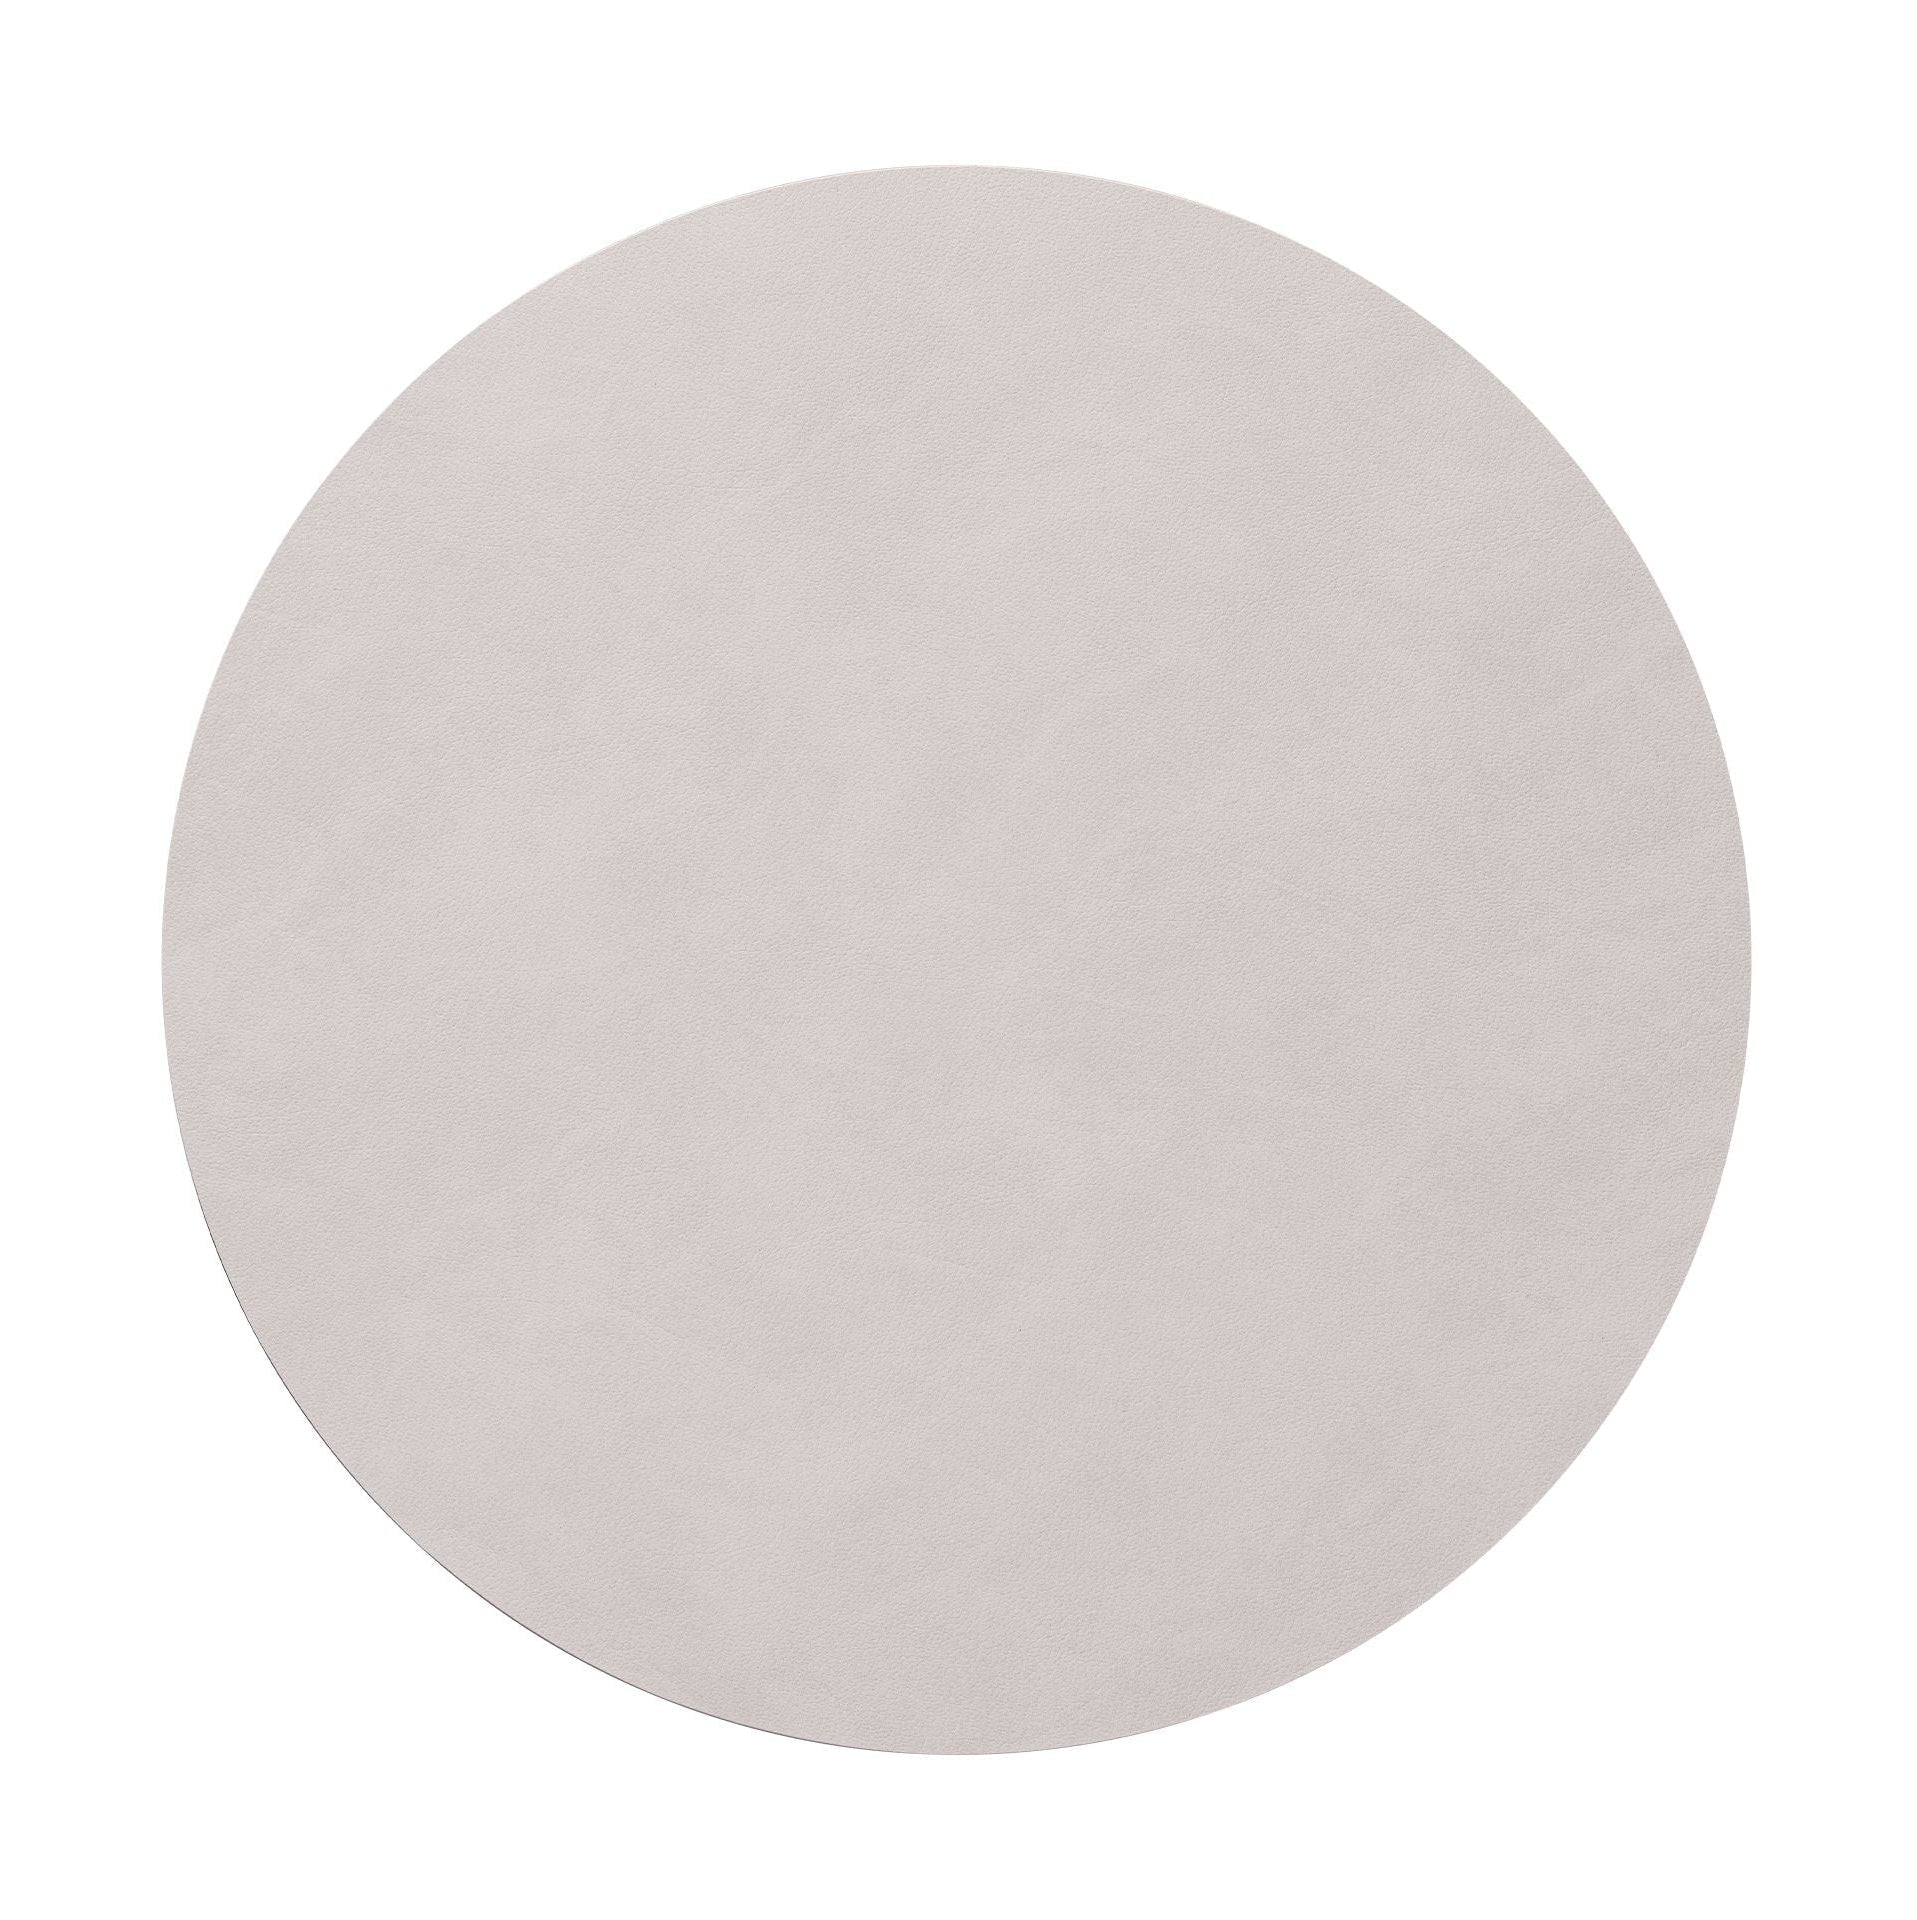 Lind Dna Tabel Mat Circle XL, Oyster White